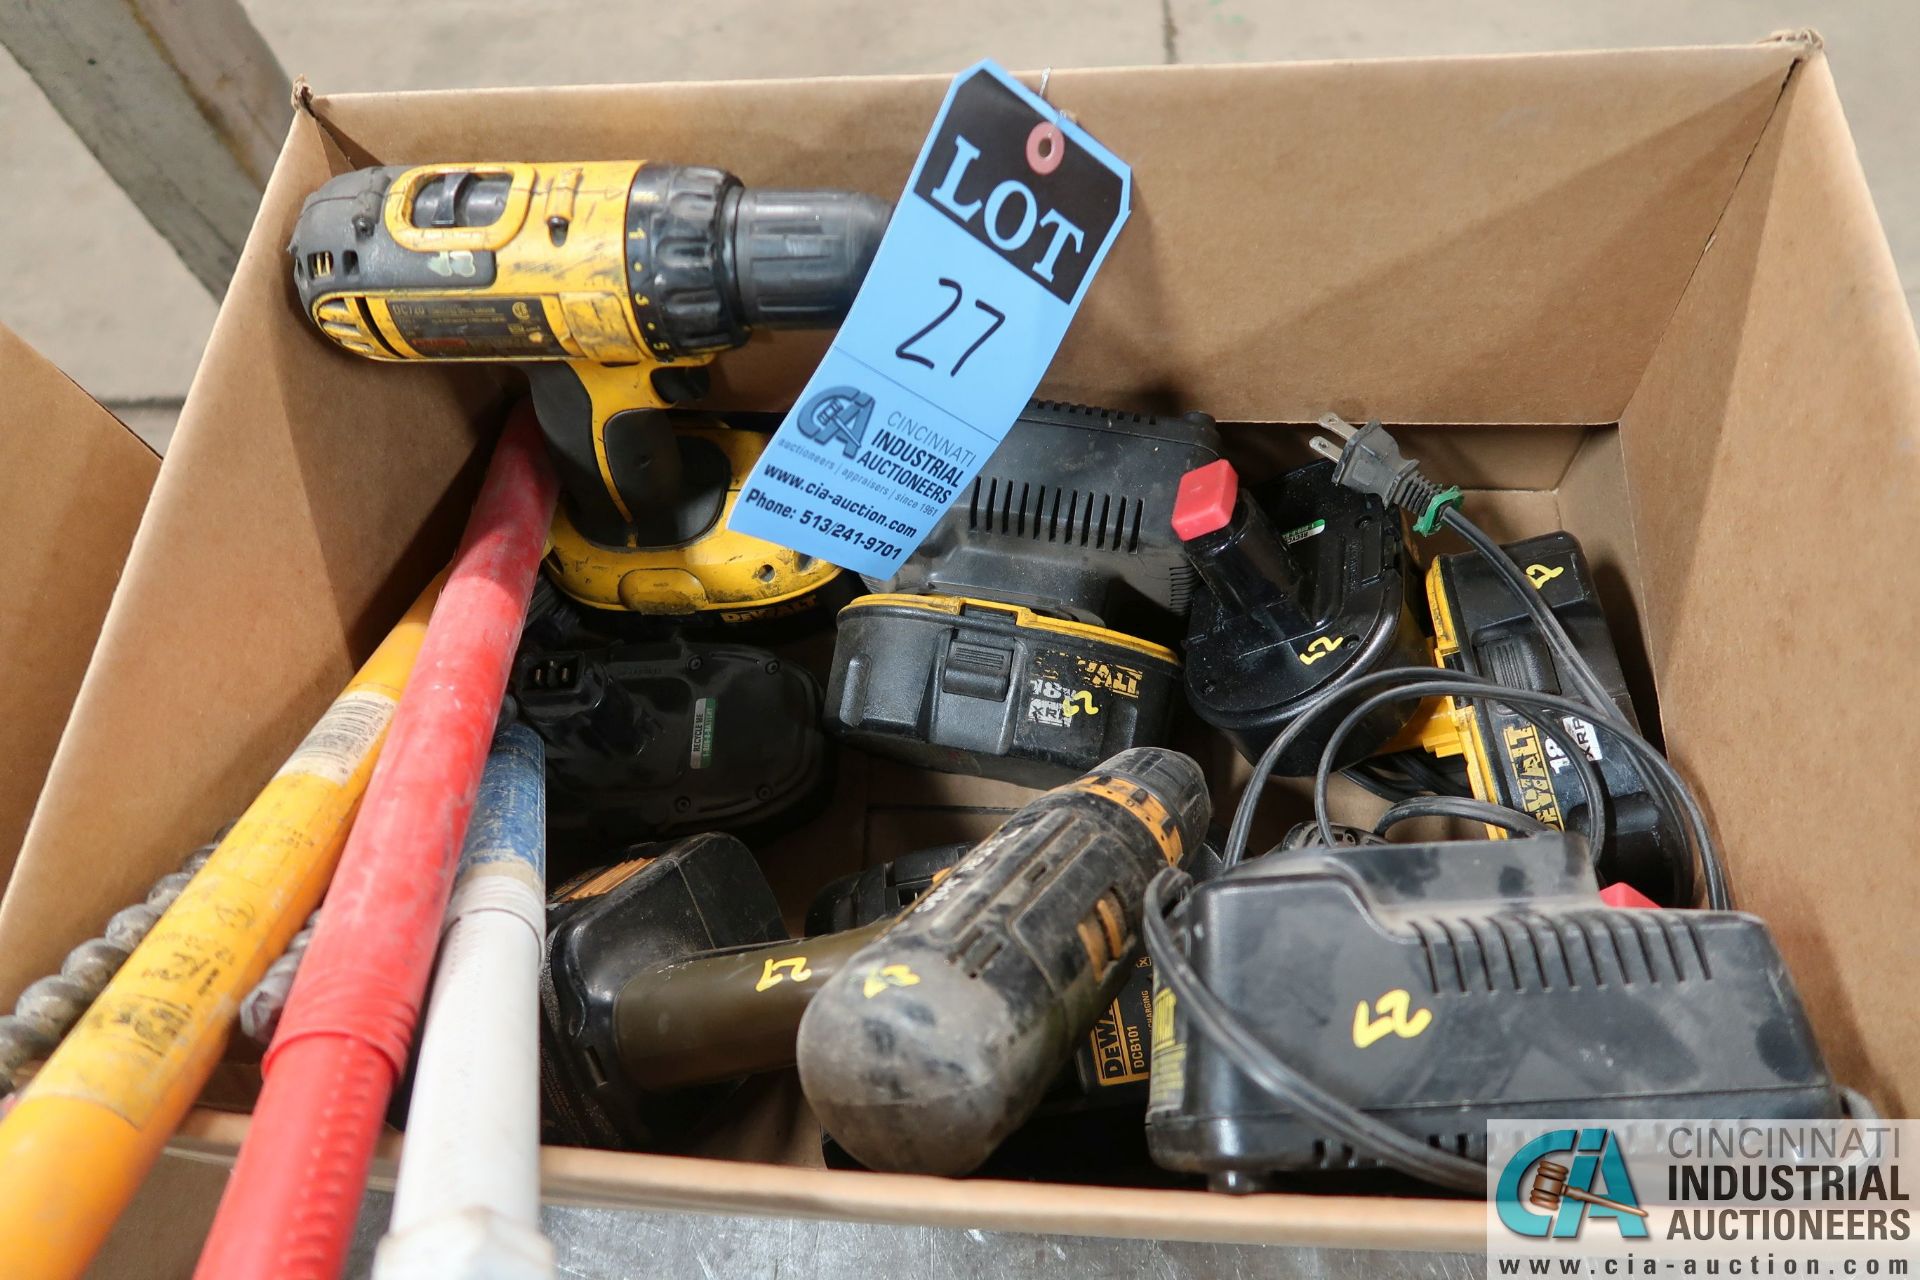 (LOT) DEWALT CORDLESS TOOLS, BATTERIES, AND CHARGERS INCLUDING (2) 1/2" DRILLS